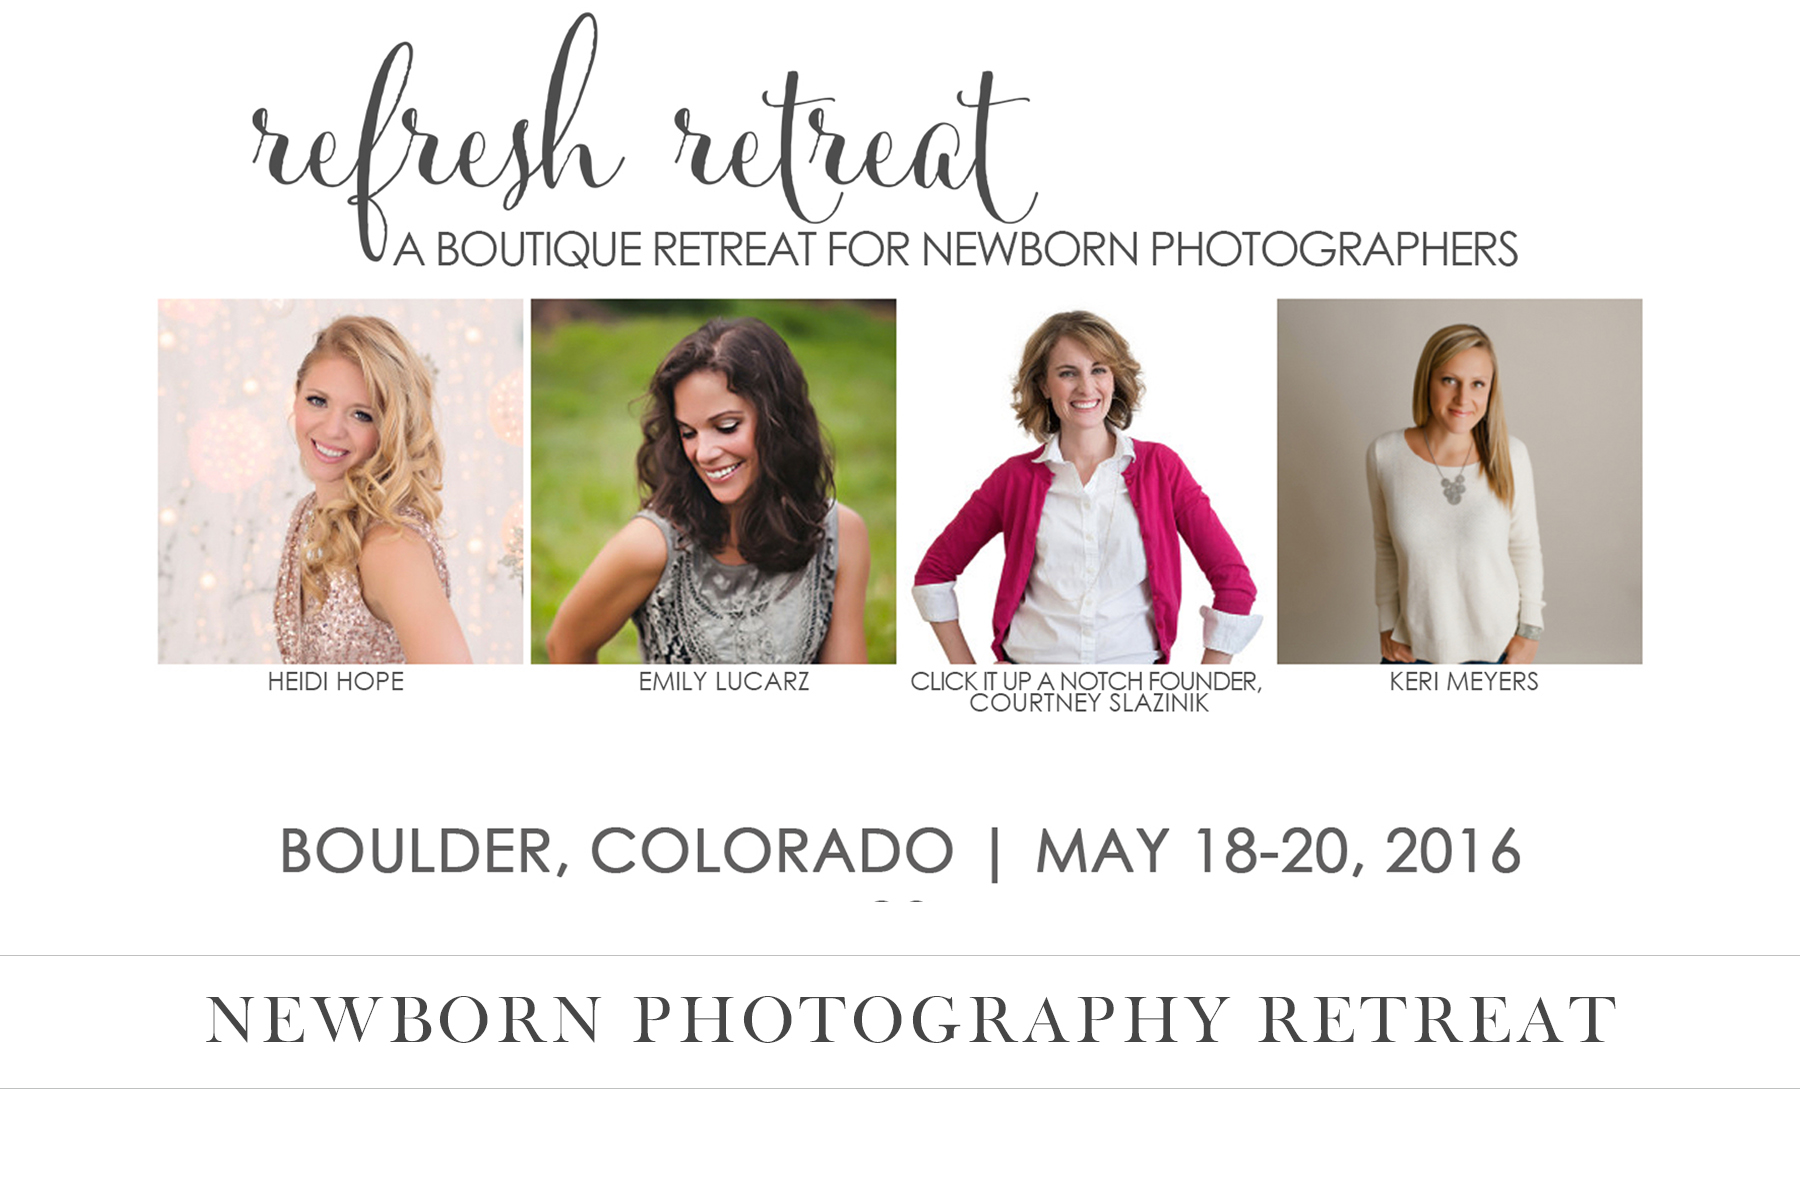 Newborn Photography workshop with Heidi Hope, Emily Lucarz, Click it up a Notch, and Keri Meyers